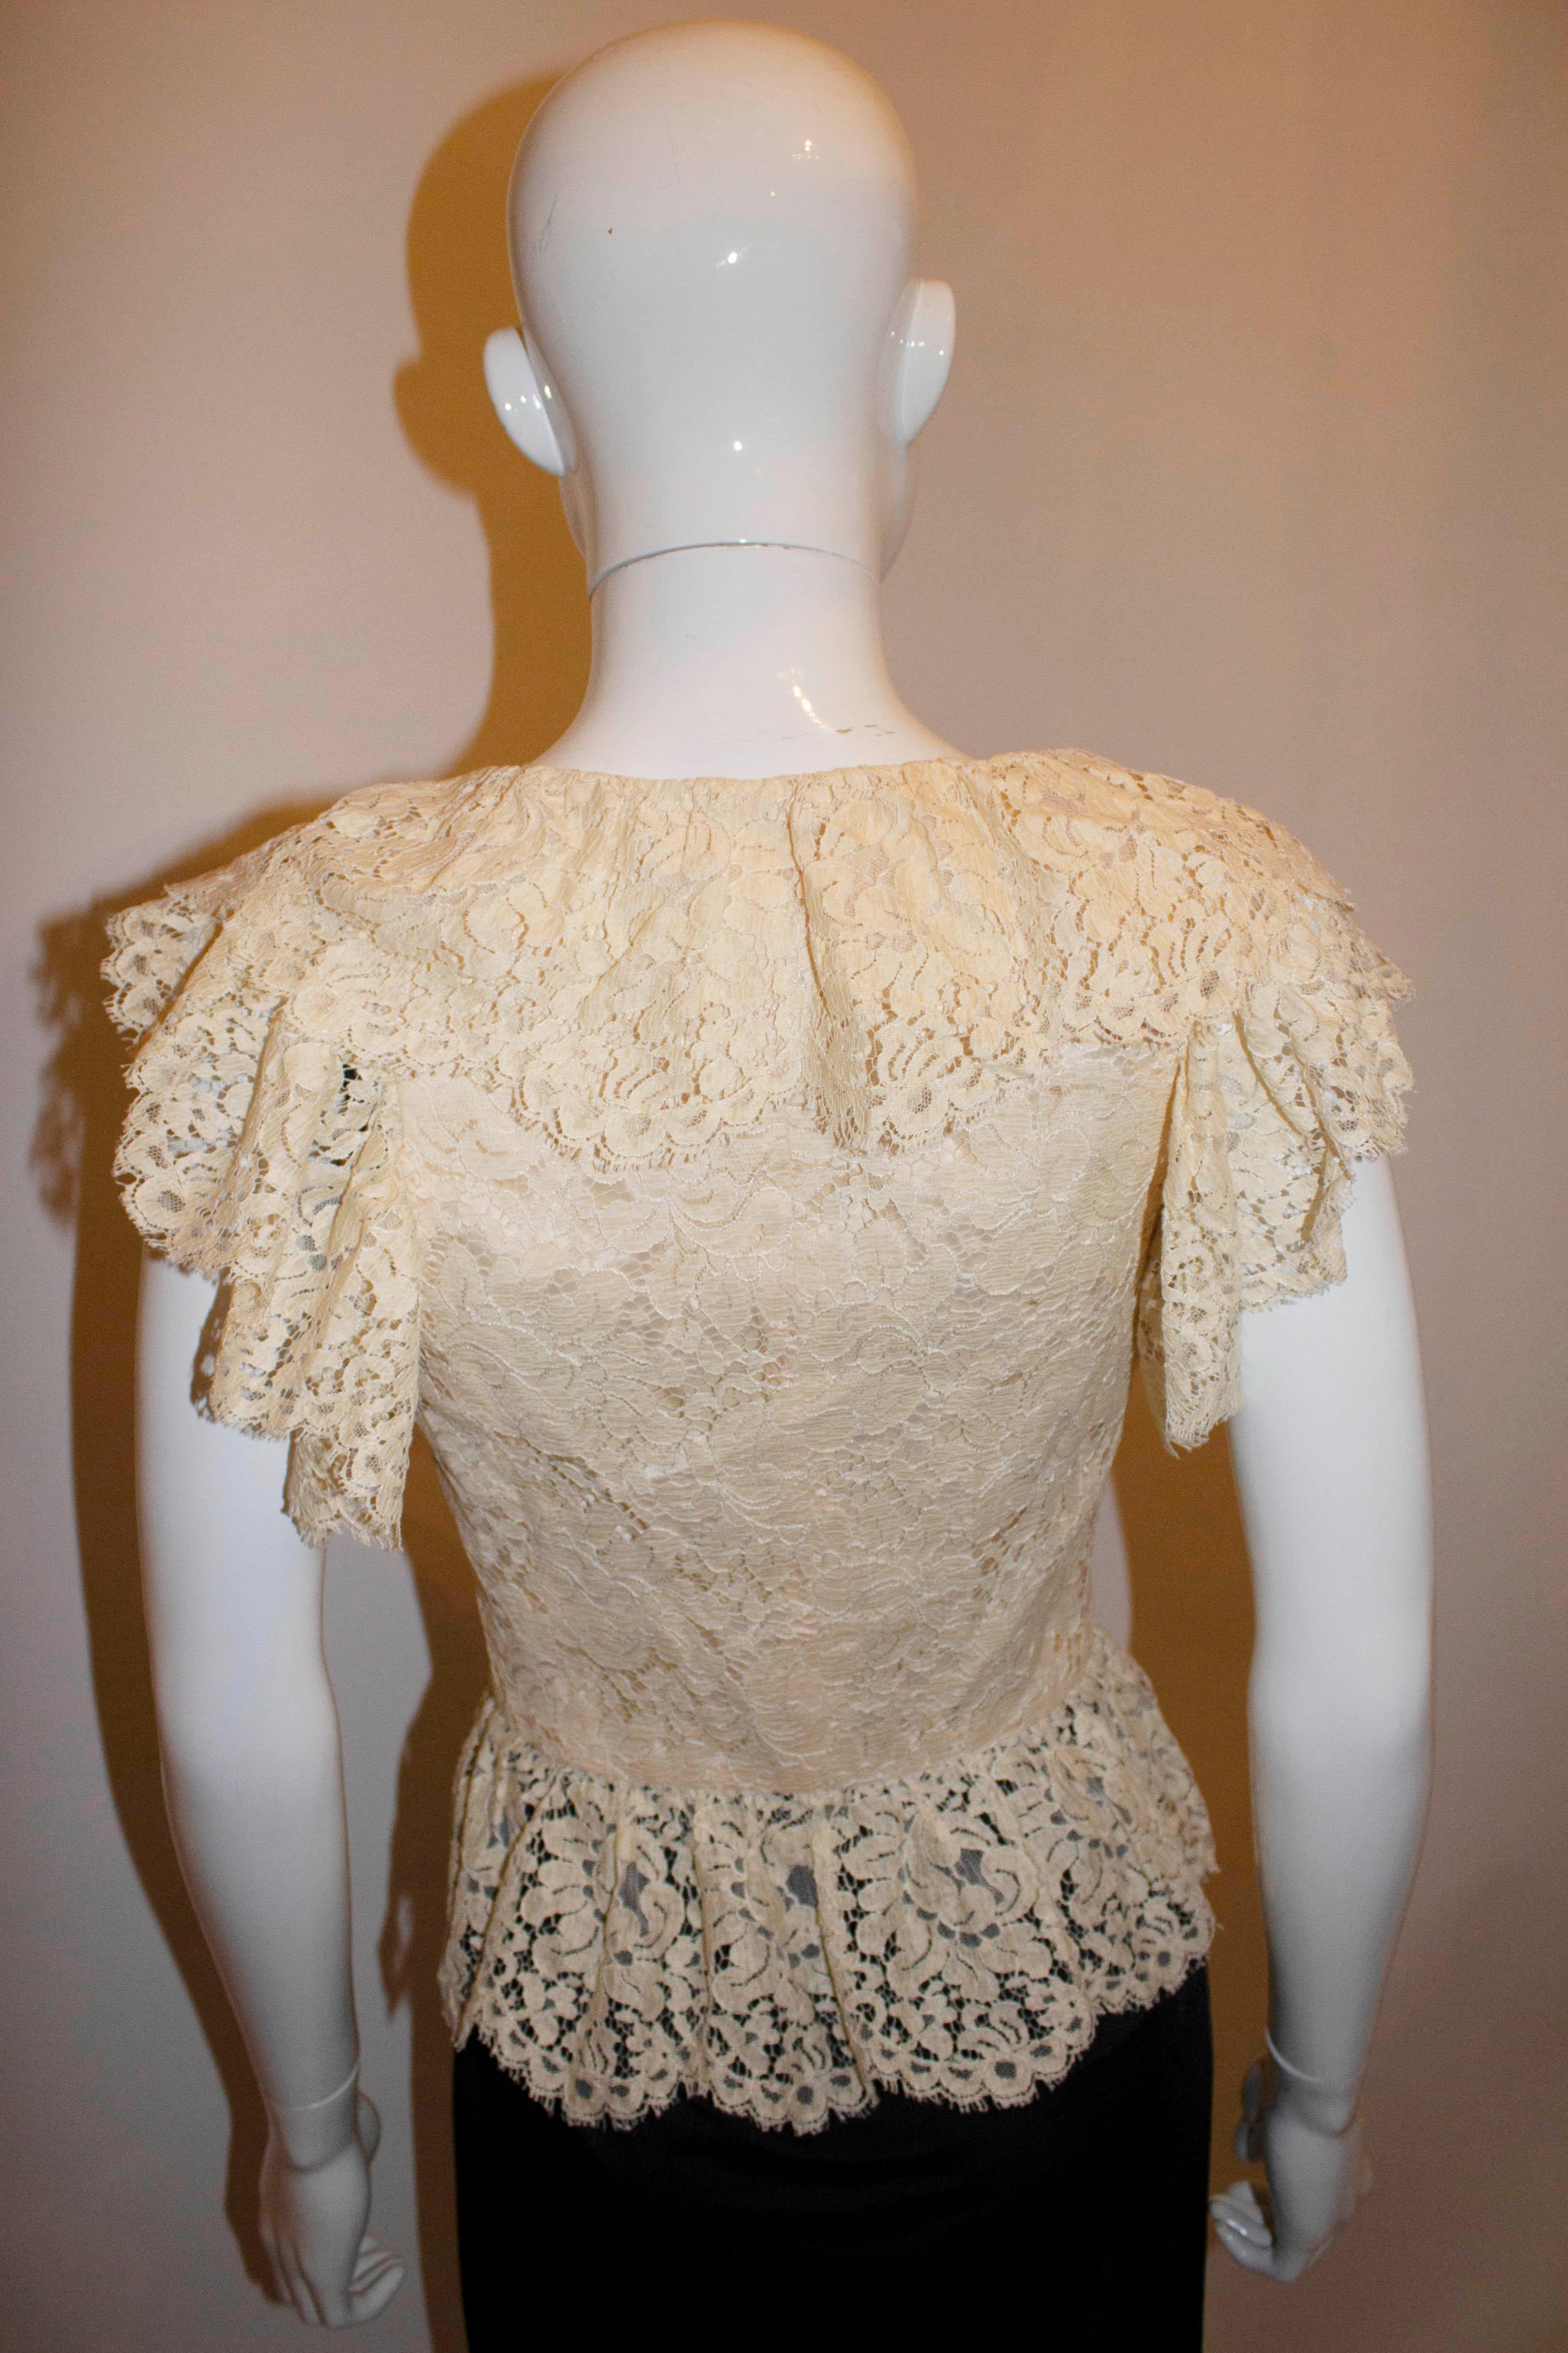 Caroline Charles Lace Frill Top In Good Condition For Sale In London, GB